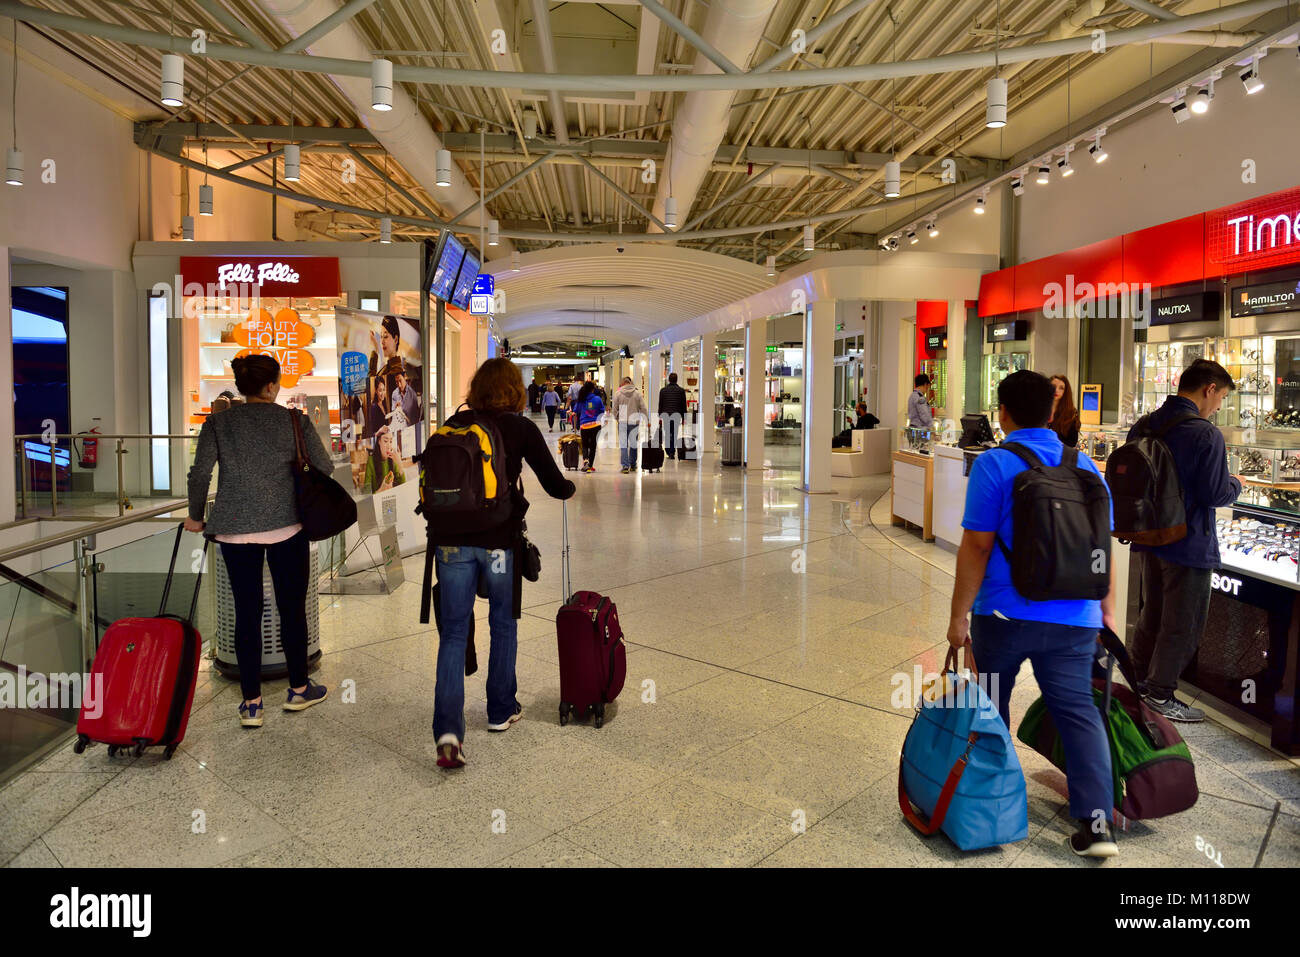 Inside Athens international airport, Greece. Hallway to flight boarding gates with shops along the way Stock Photo